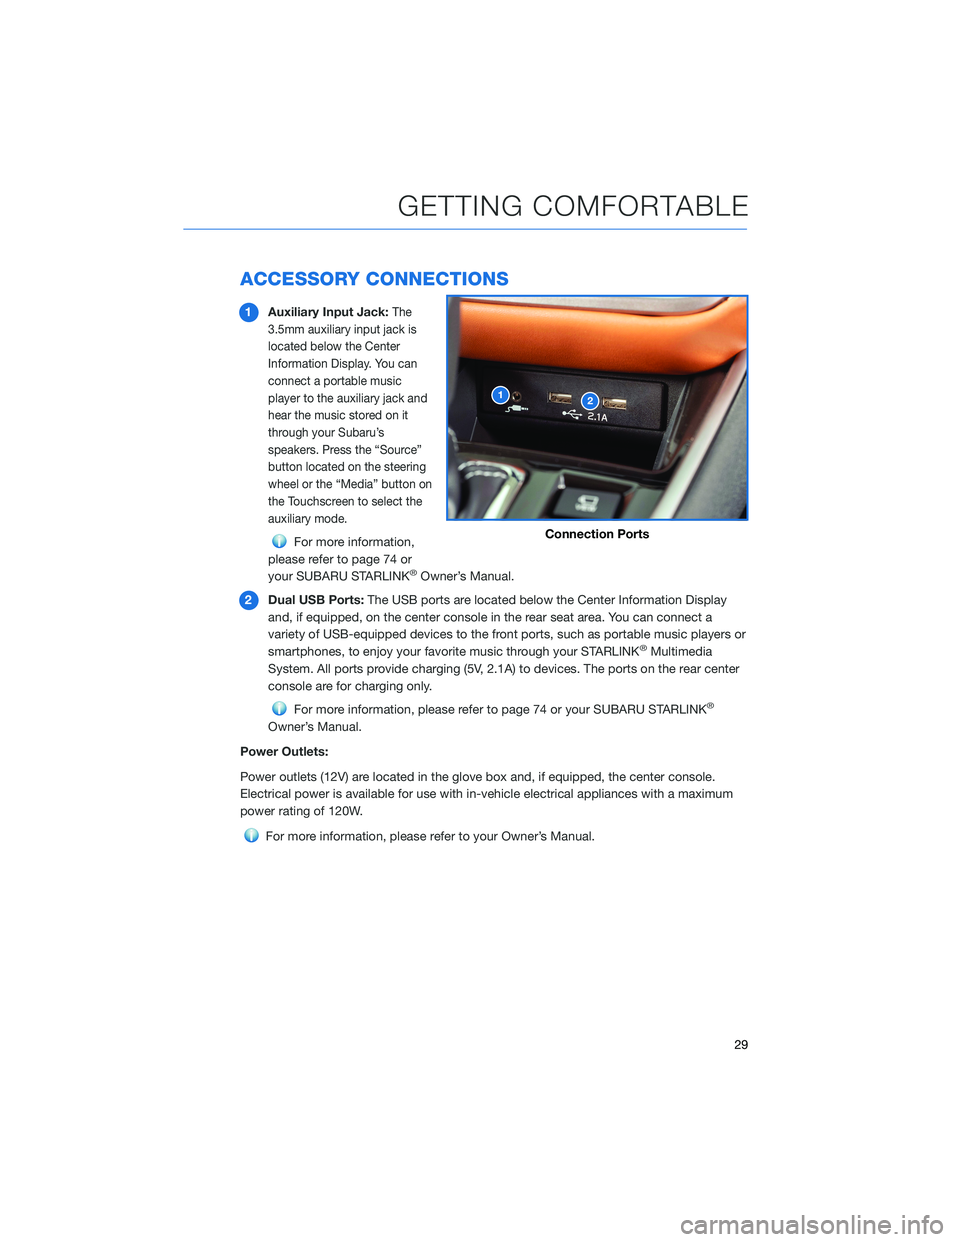 SUBARU LEGACY 2021  Getting Started Guide ACCESSORY CONNECTIONS
1Auxiliary Input Jack:The
3.5mm auxiliary input jack is
located below the Center
Information Display. You can
connect a portable music
player to the auxiliary jack and
hear the m